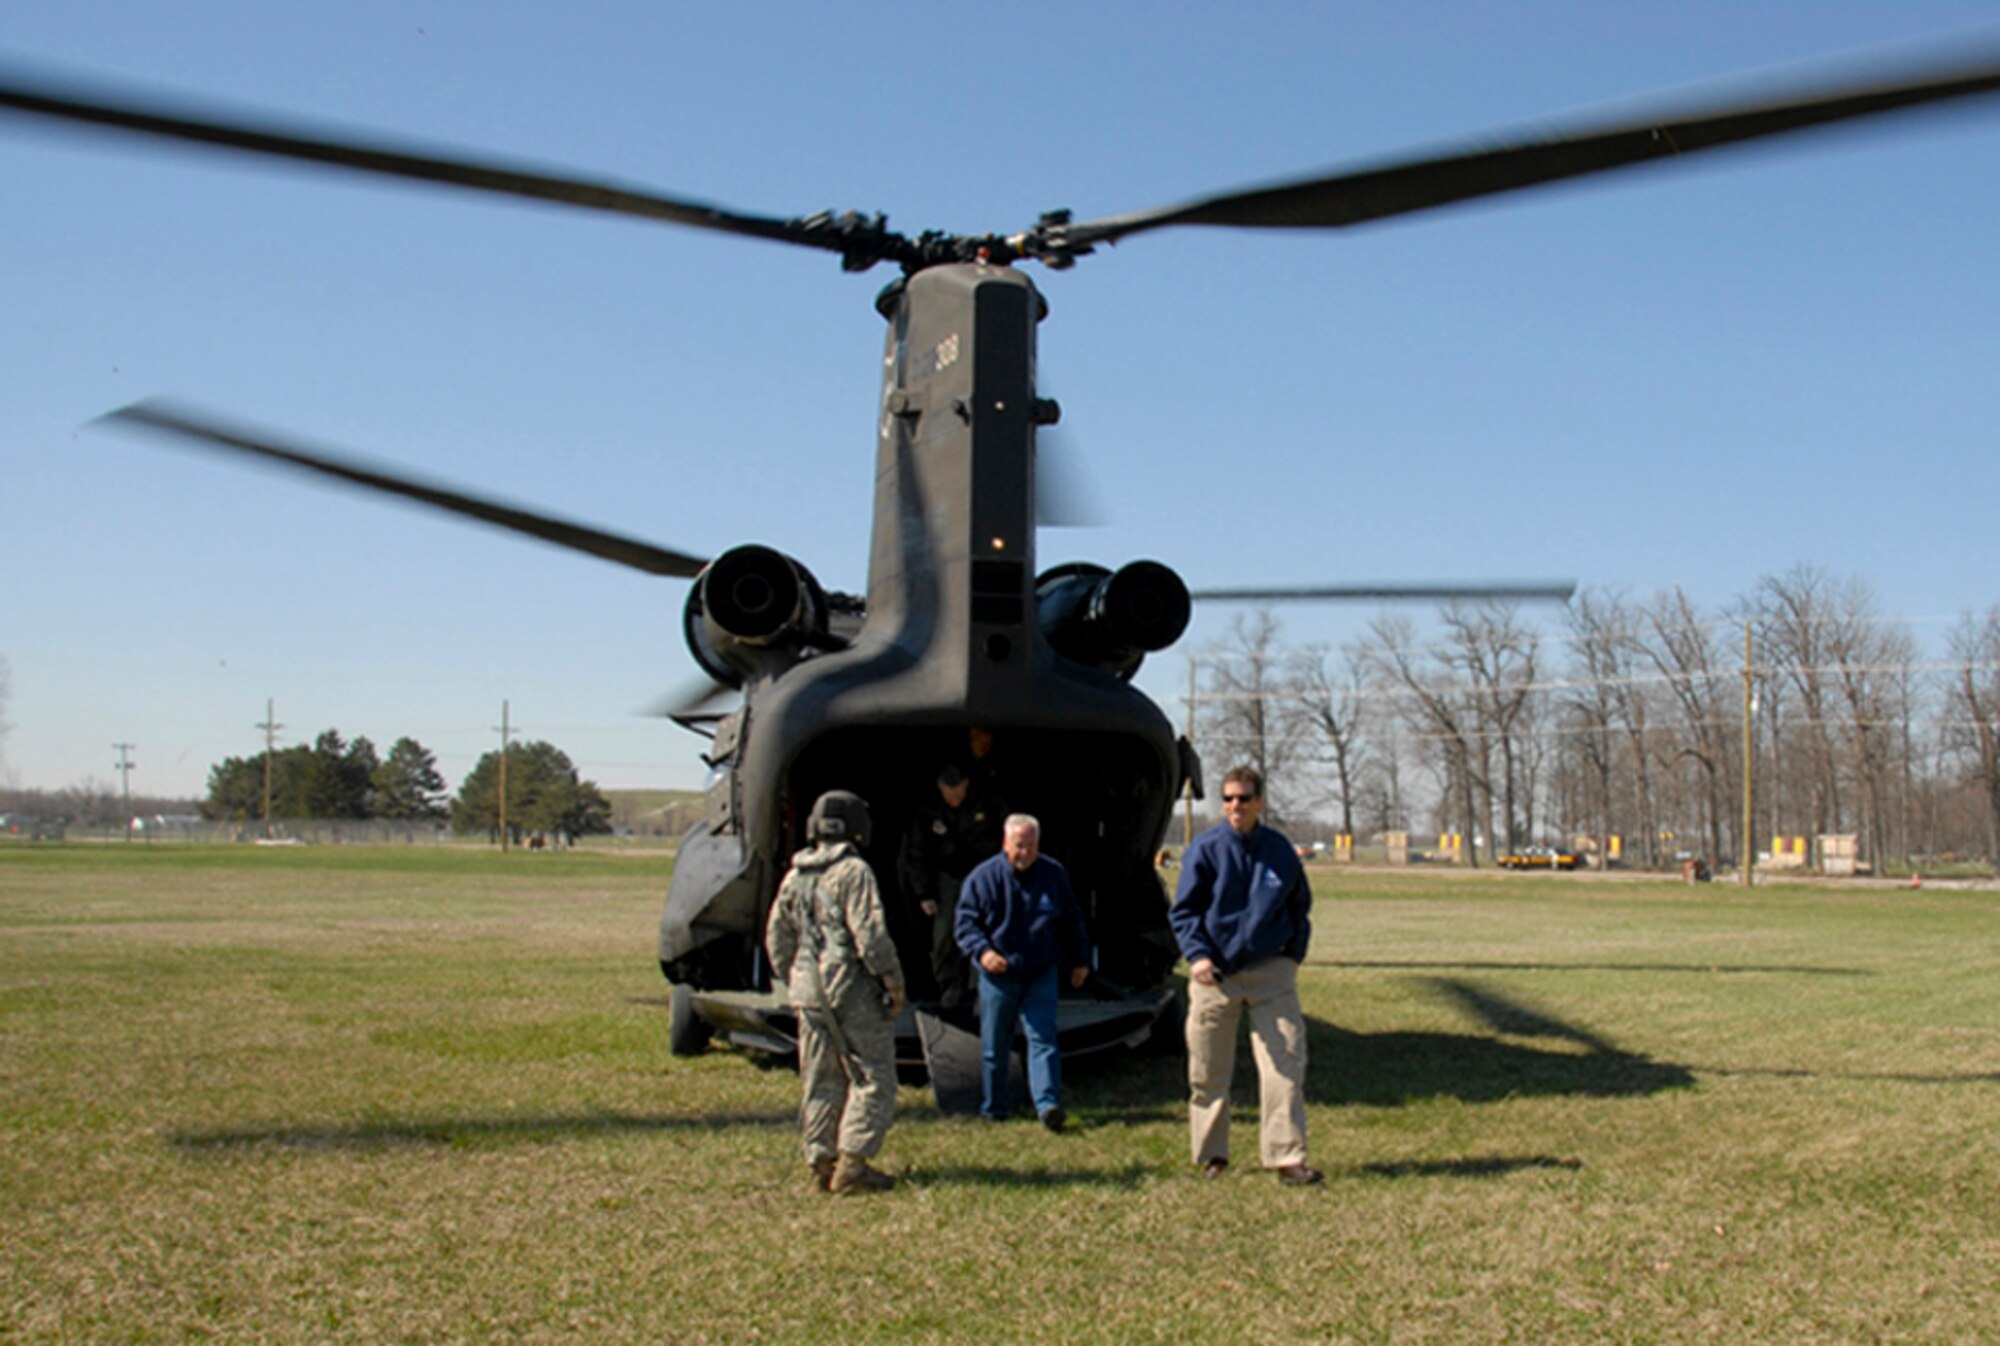 Members of the Young Presidents' Organization disembark from a Chinook helicopterat Camp Perry, in Port Clinton, Ohio, May 13, 2011. The YPO spent the day learning about the missions and leadership that make up the Ohio National Guard.